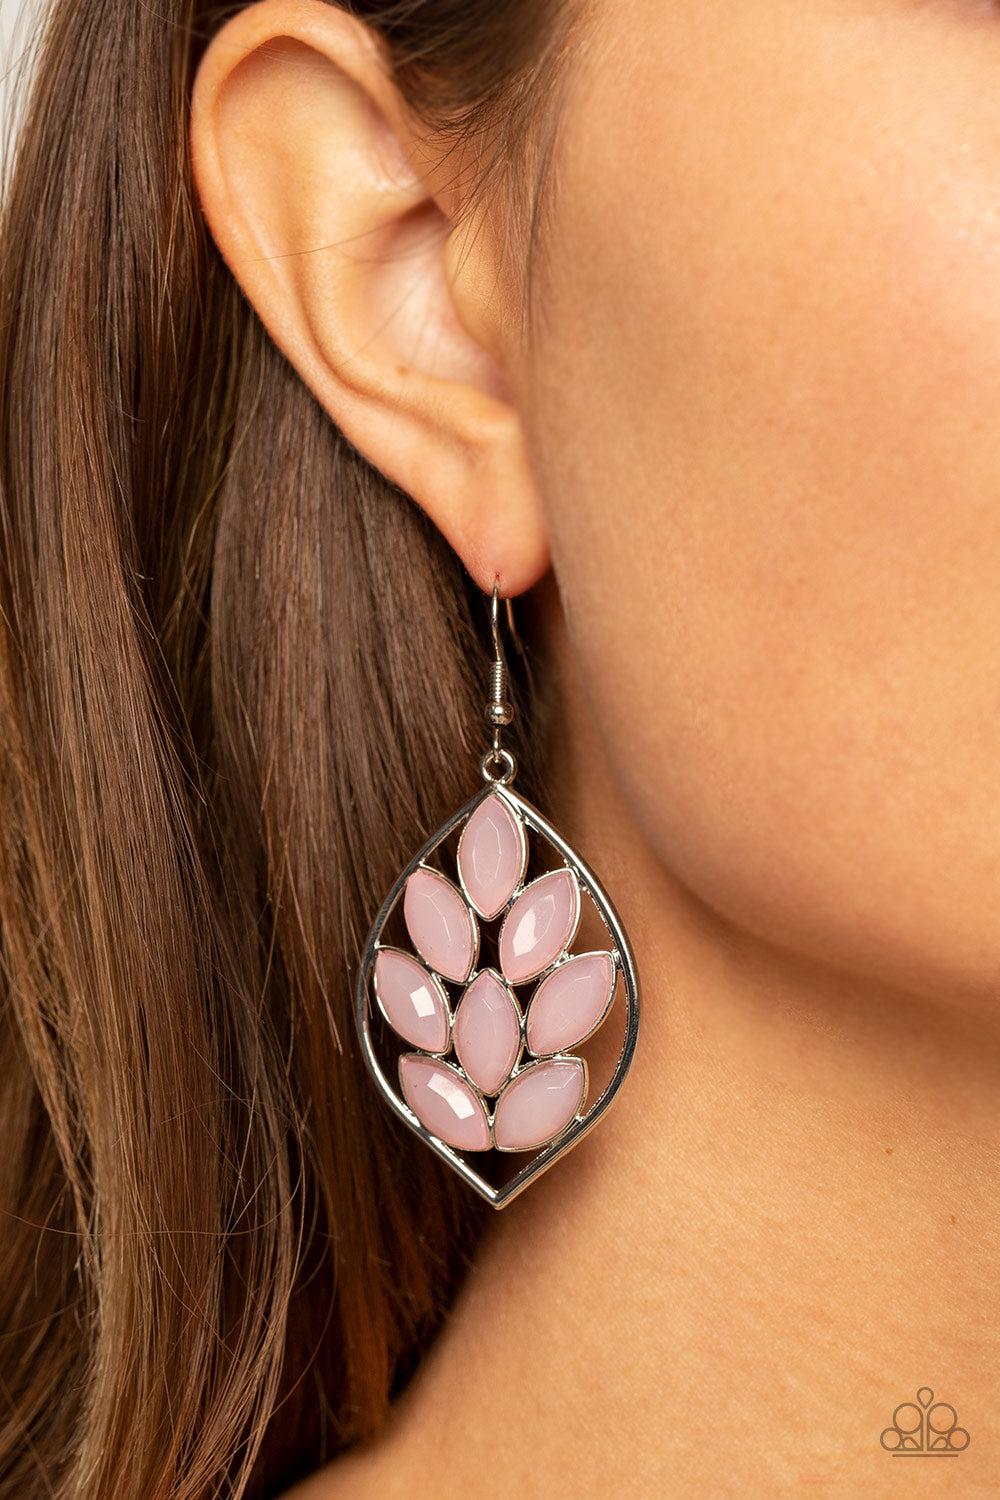 Glacial Glades Pink Cat's Eye Stone Earrings- lightbox - CarasShop.com - $5 Jewelry by Cara Jewels